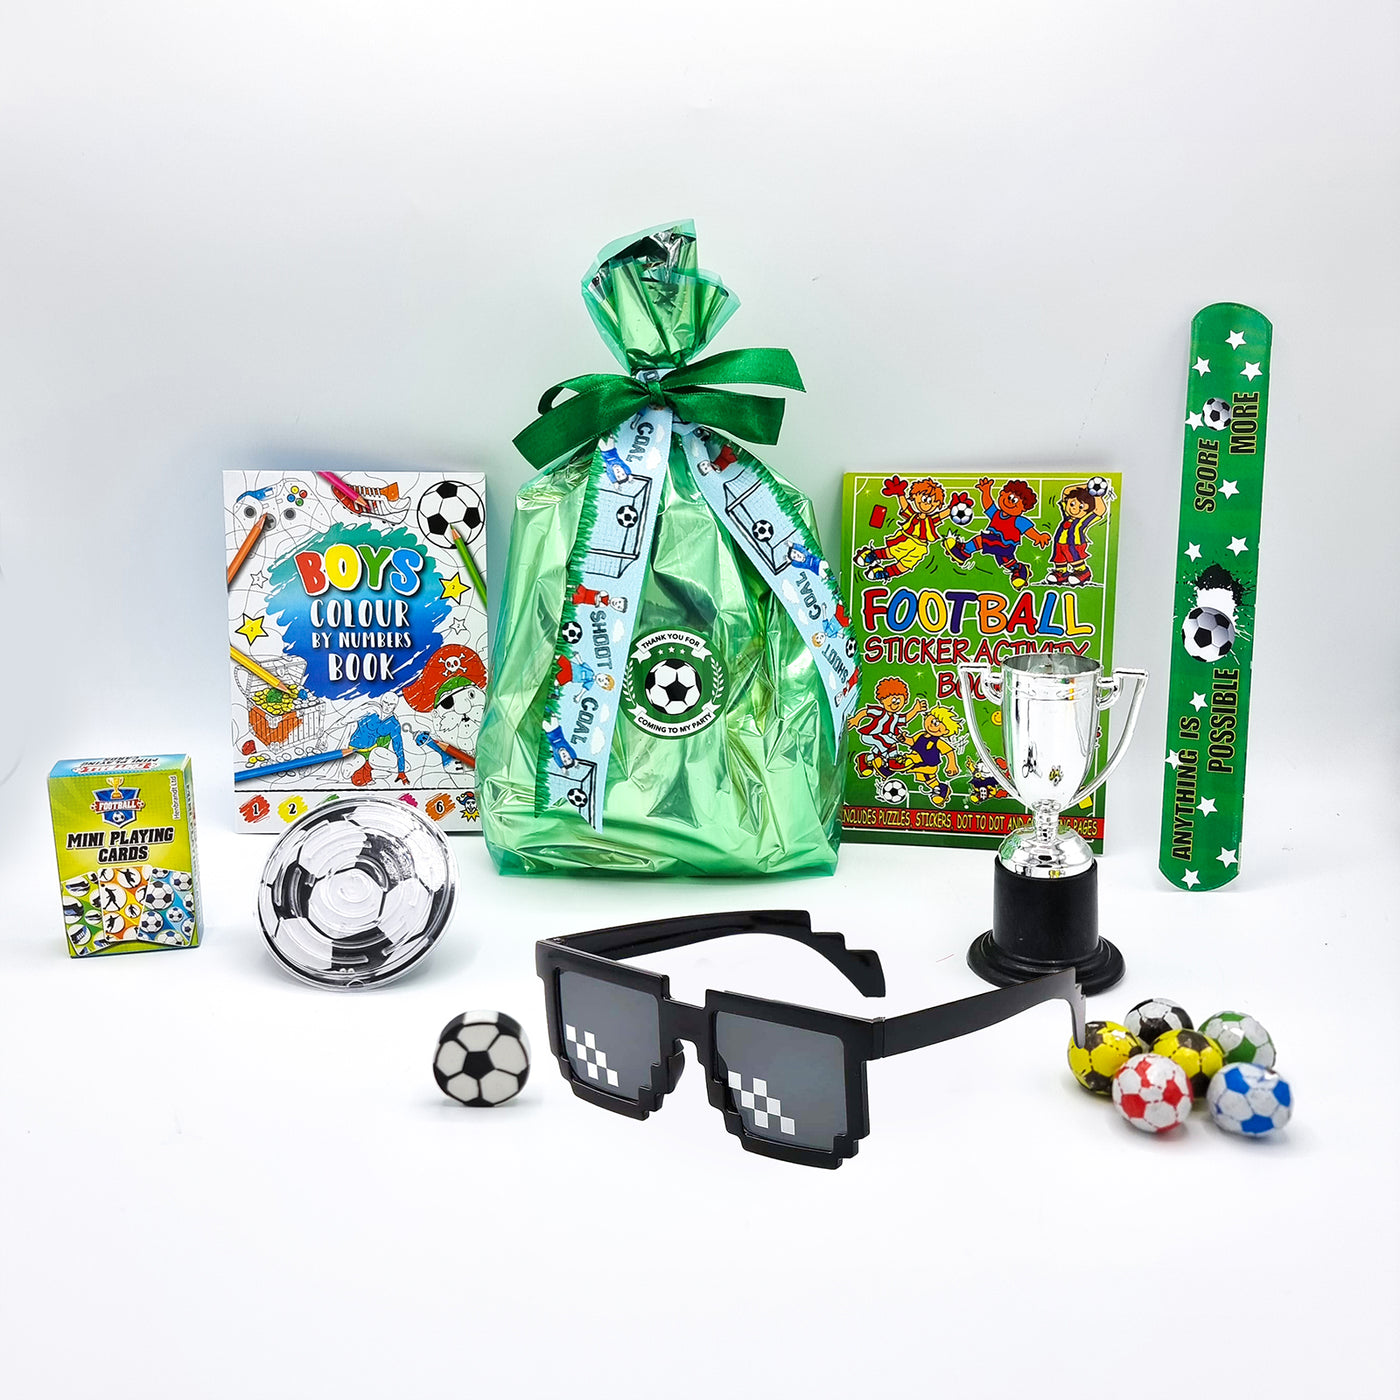 Pre-filled Boys Green Gold Football Party Goody Bags With Toys And Vegan Sweets.